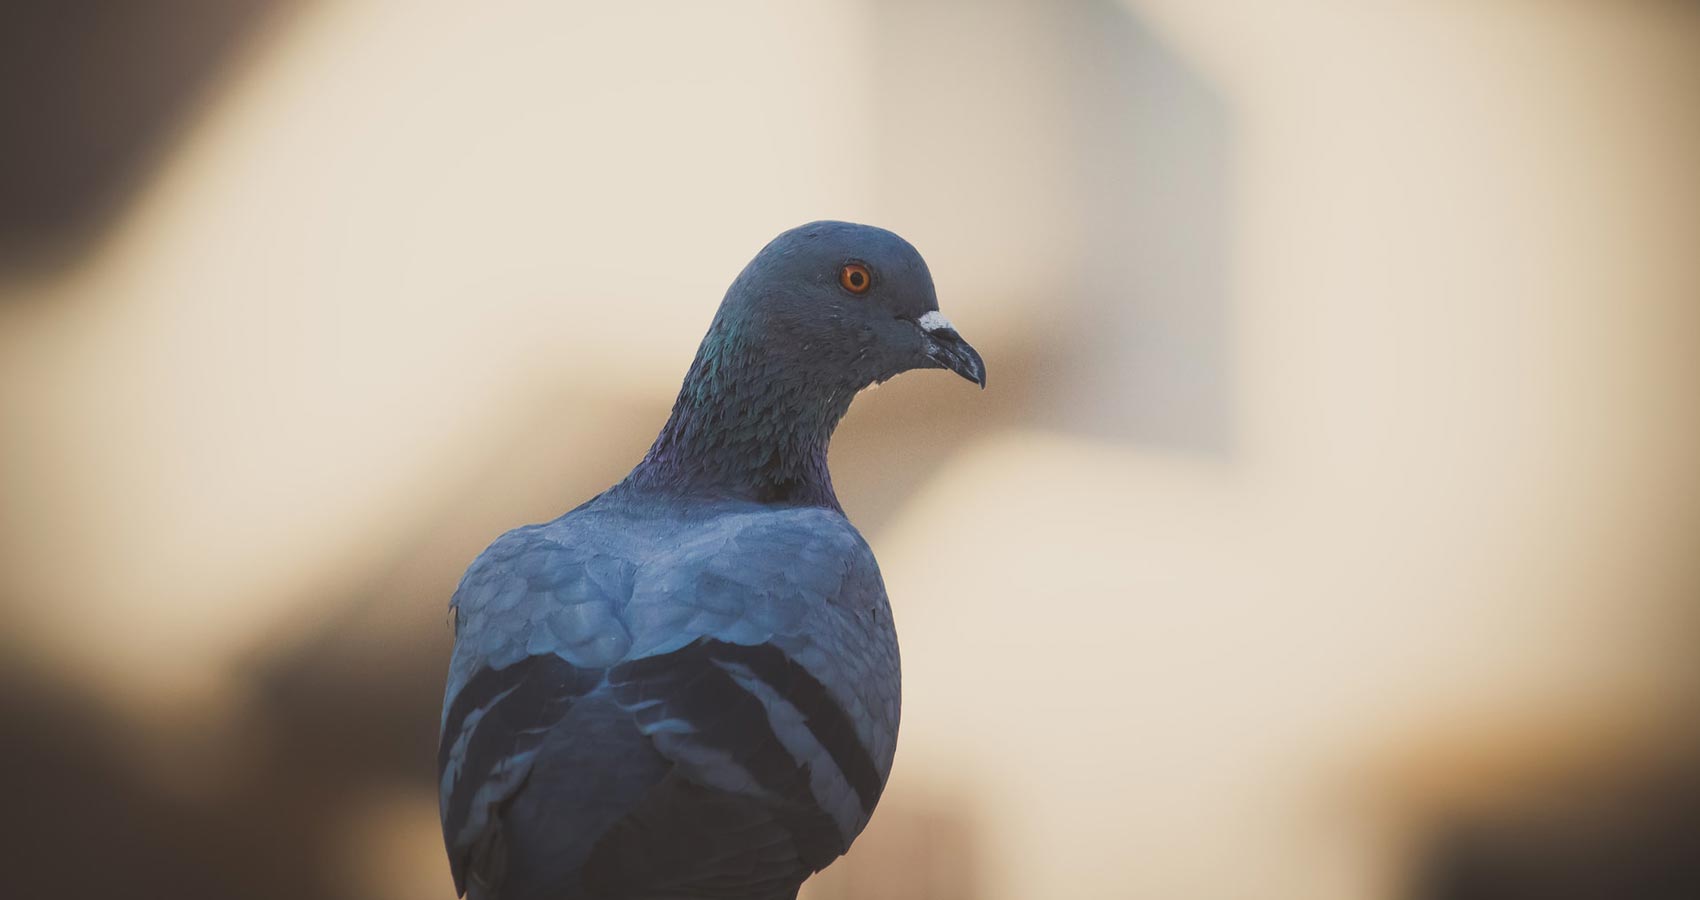 That Pigeon, micropoetry by Tamkot Bhagwan at Spillwords.com